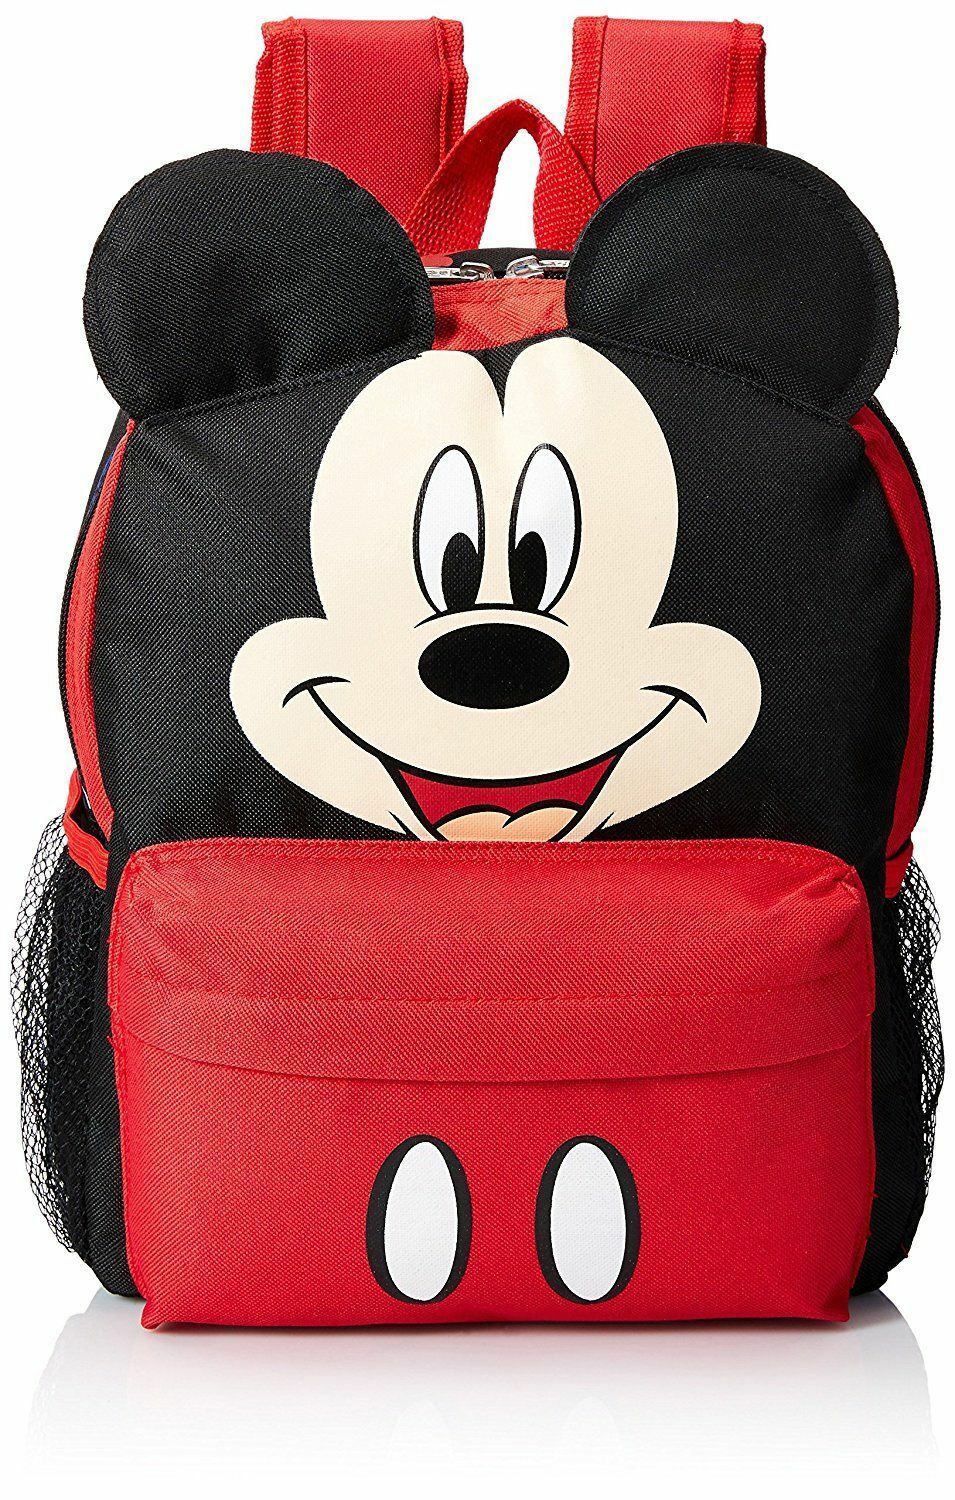 12" Disney Mickey Mouse Face School Backpack With Ears